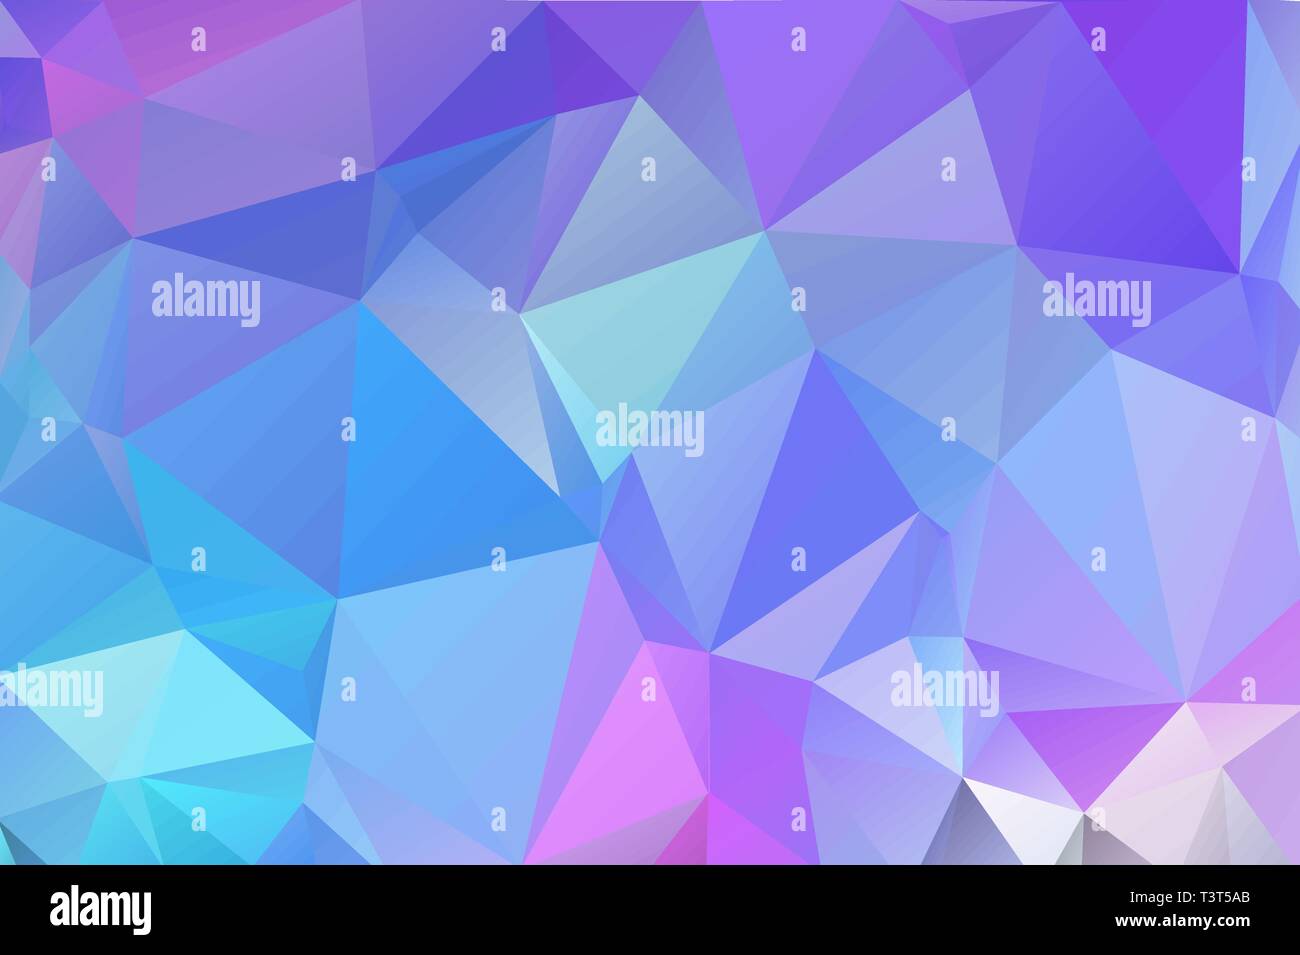 Cool purple, blue abstract background of triangles. Stock Vector